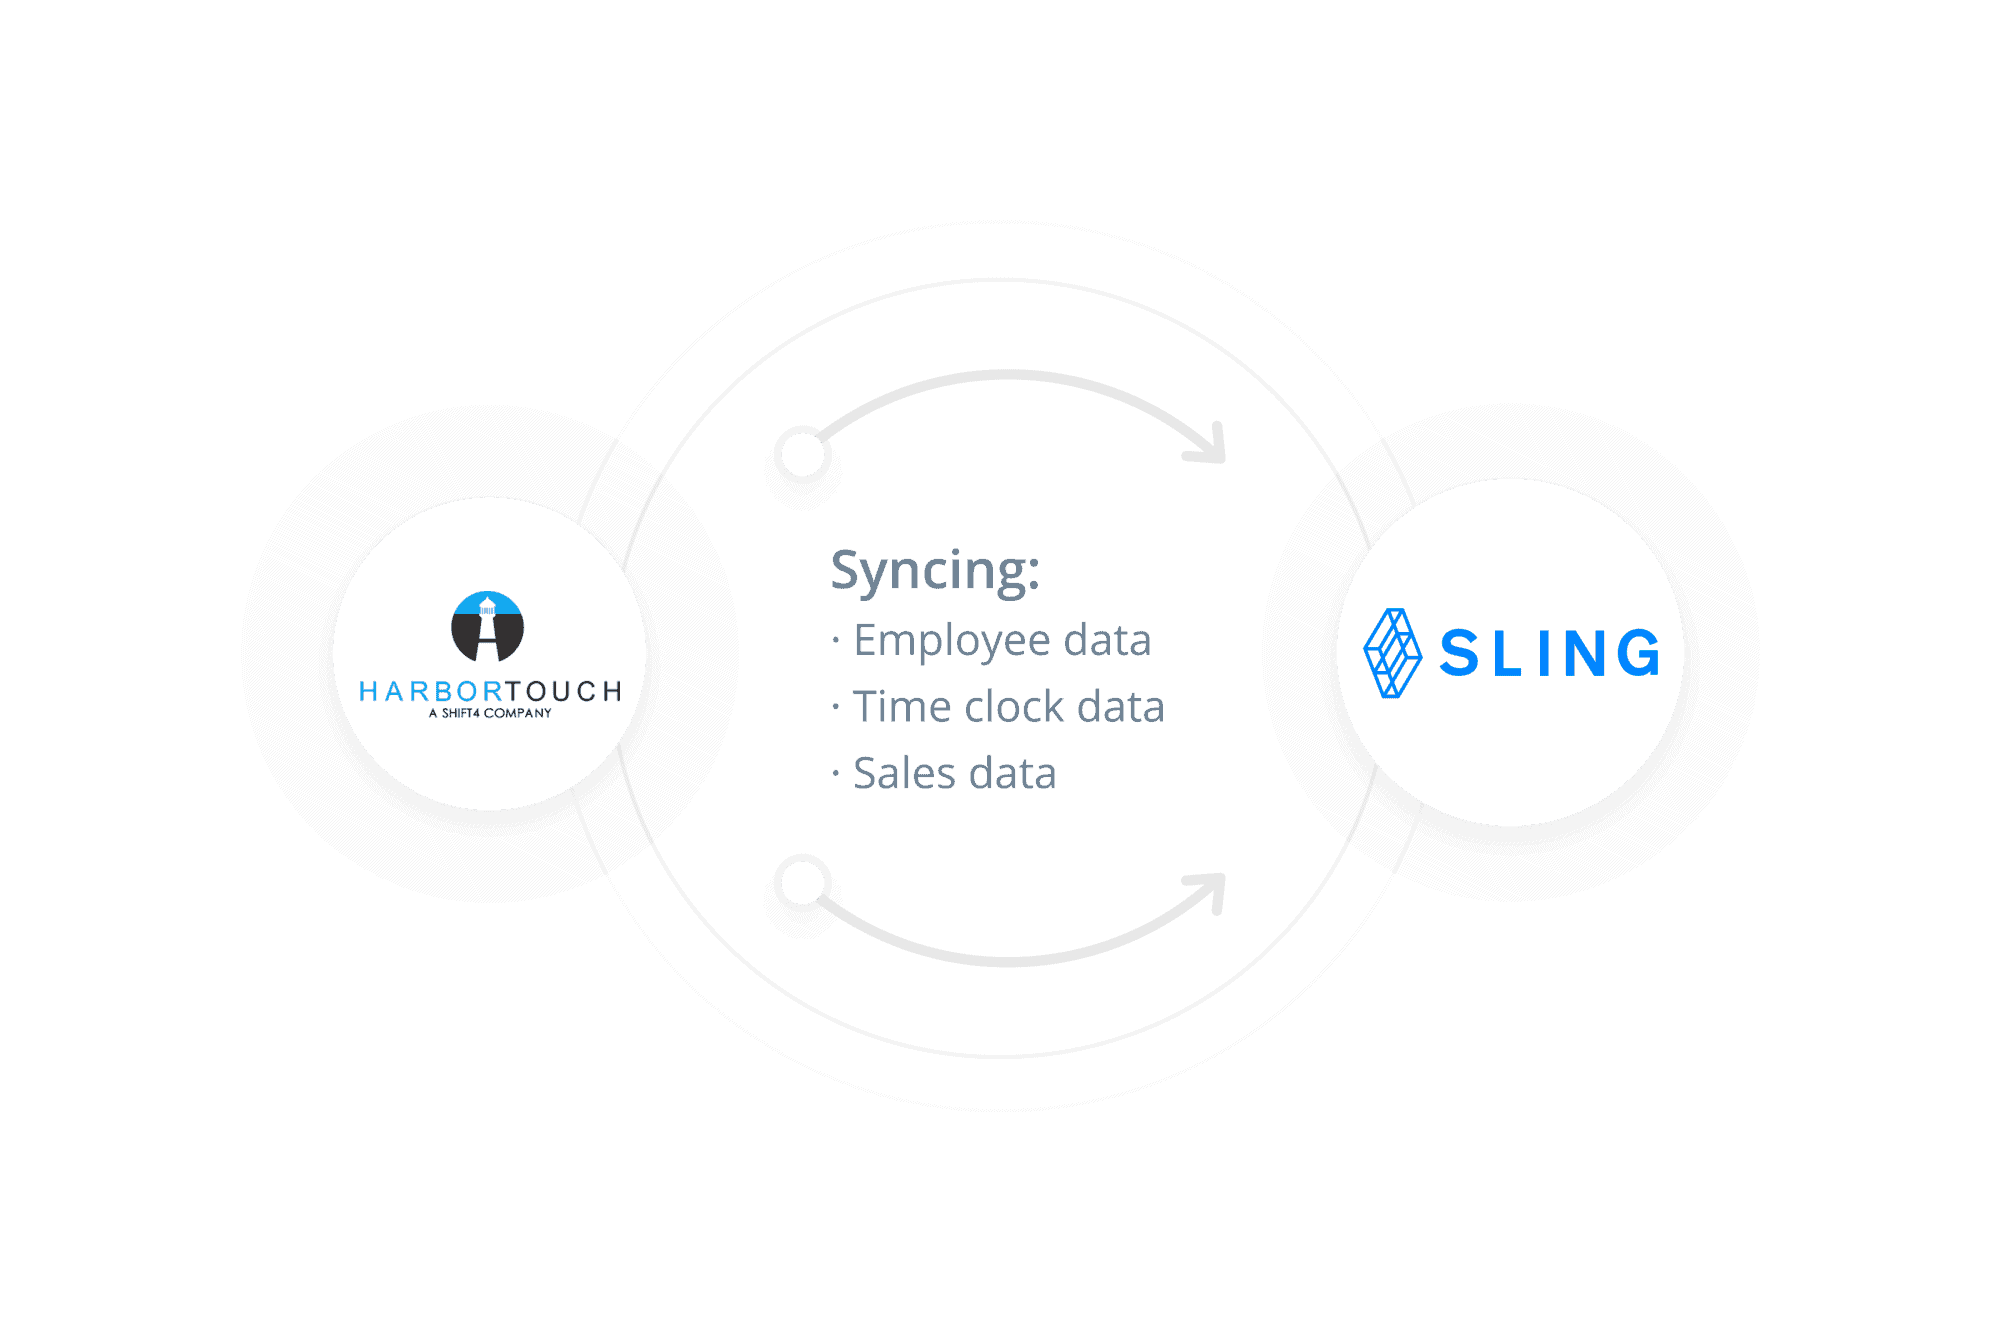 Sling syncs with Harbor Touch